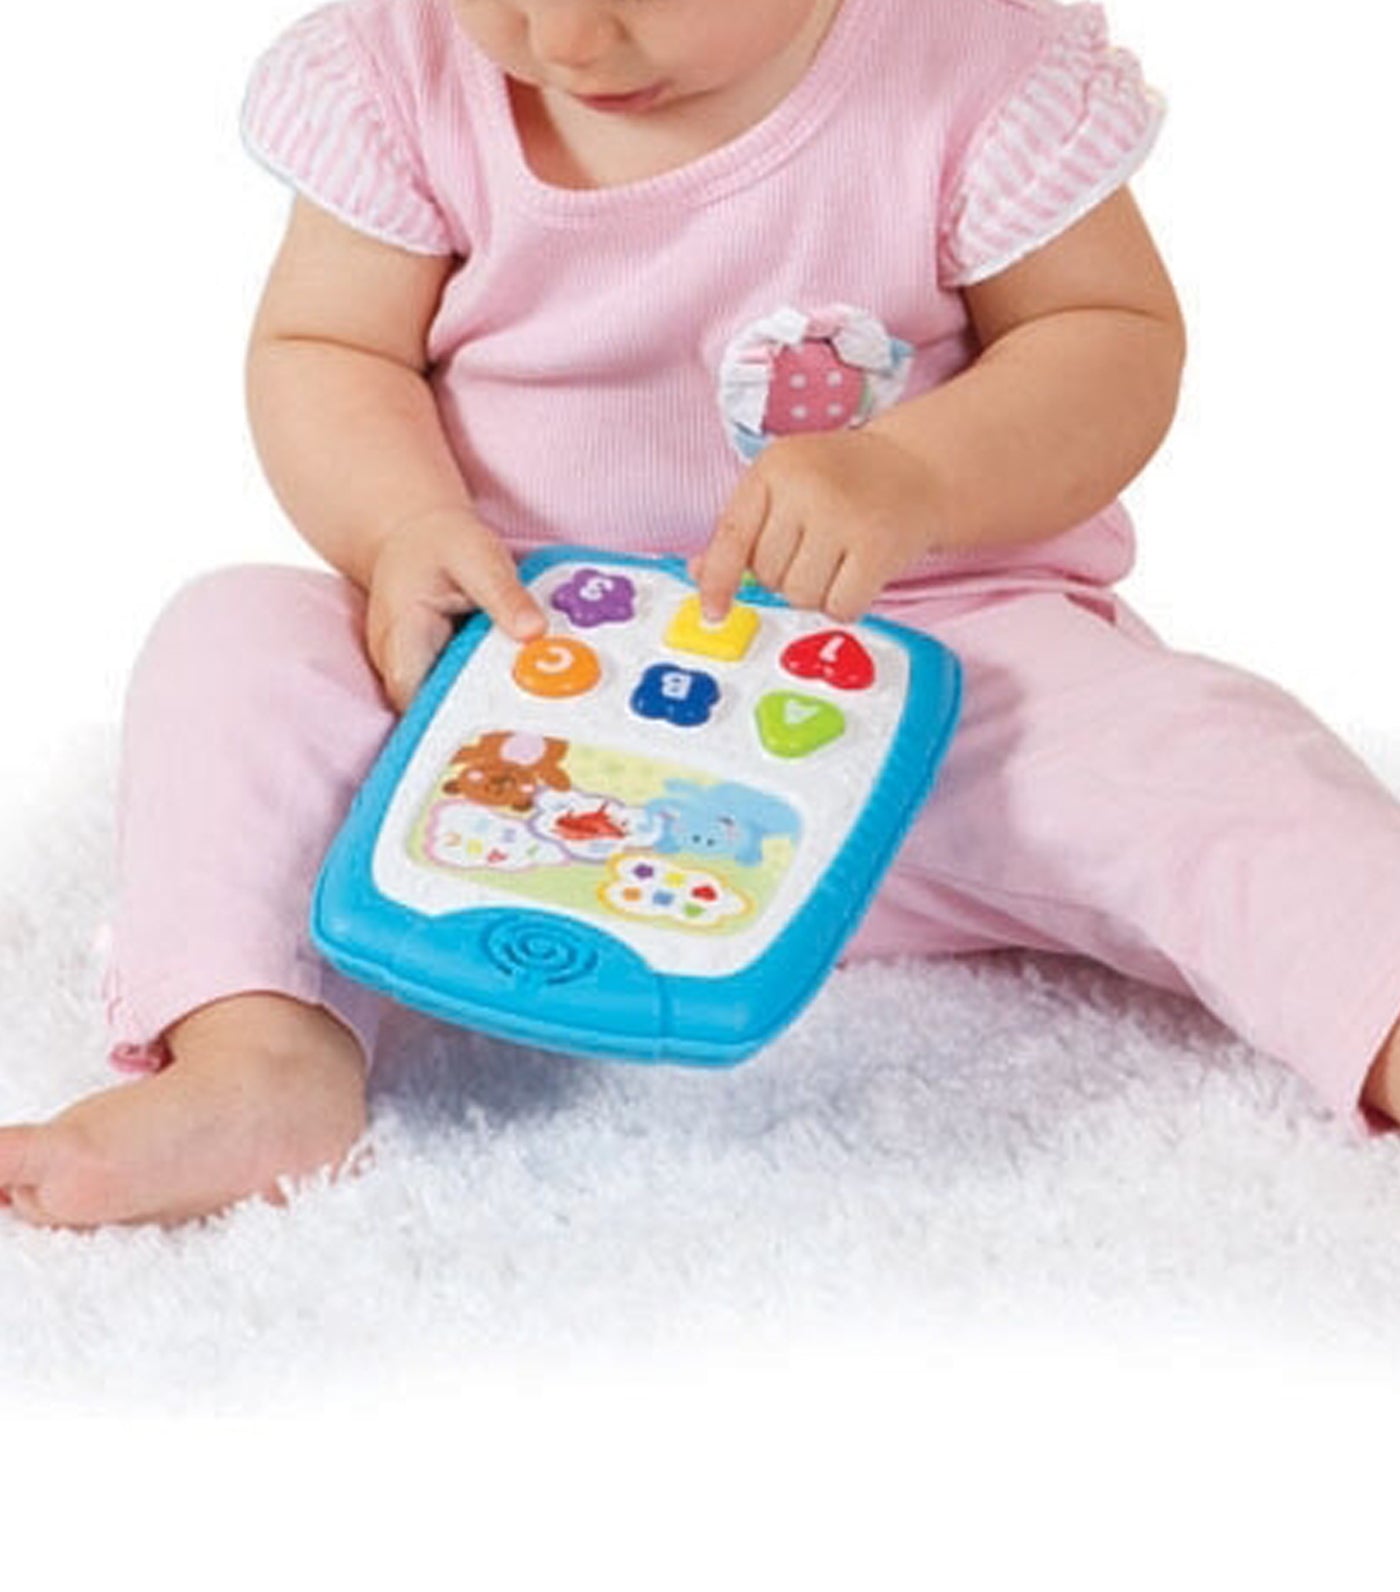 Baby's Learning Pad